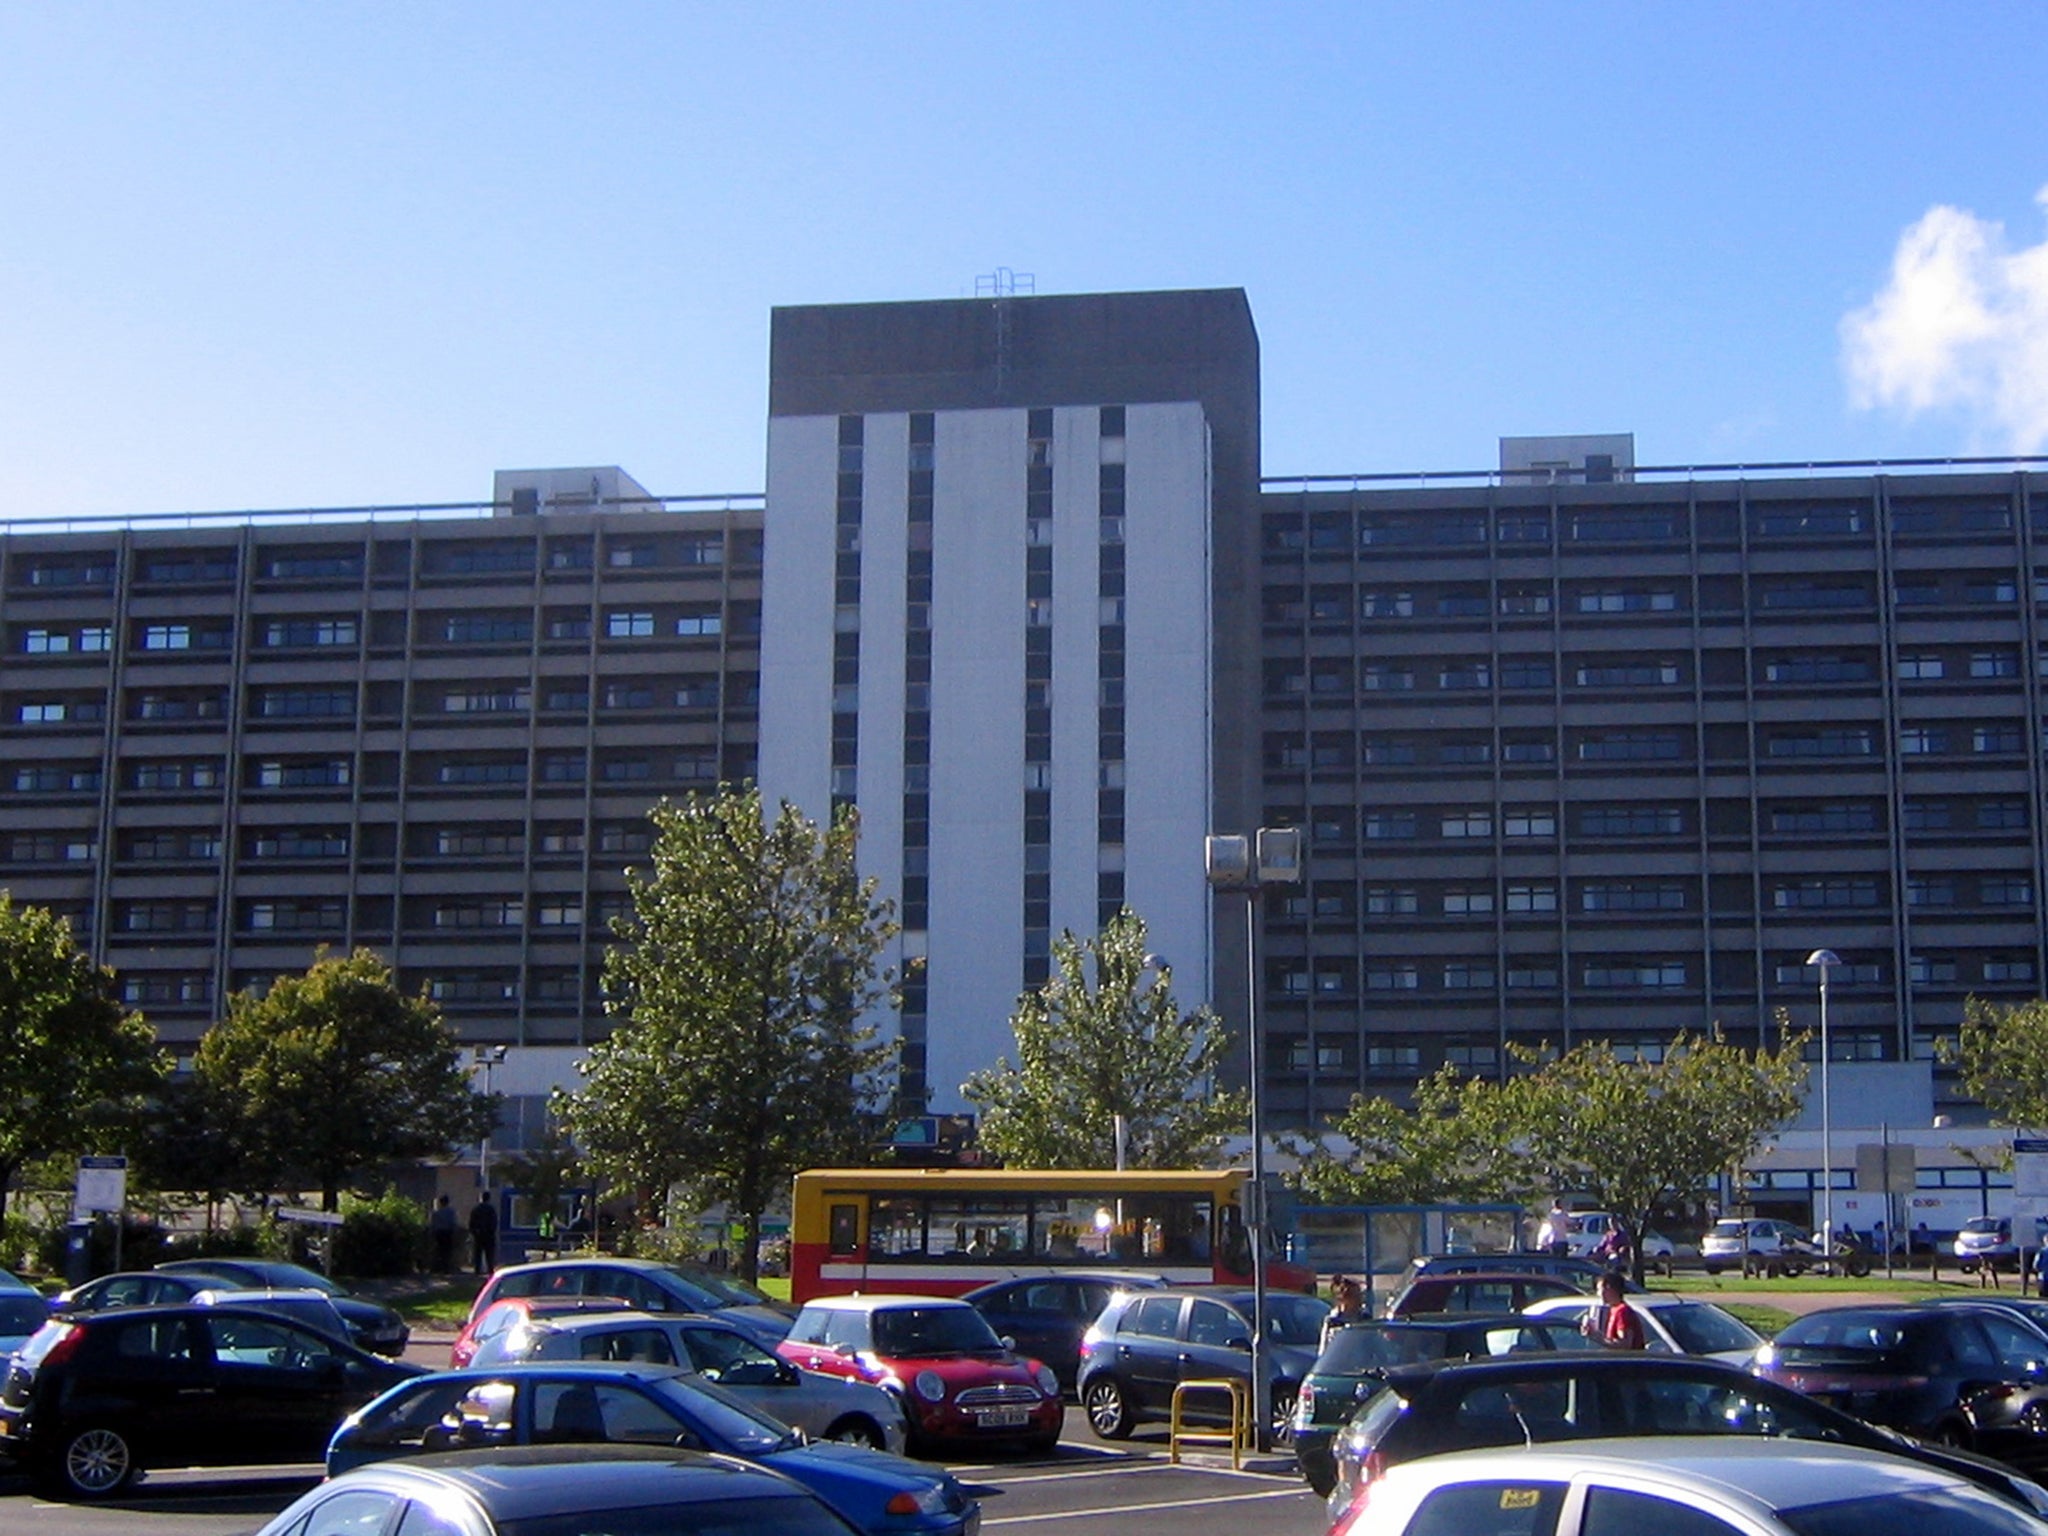 Glasgow's Gartnavel Hospital at which a healthcare worker has been diagnosed with Ebola